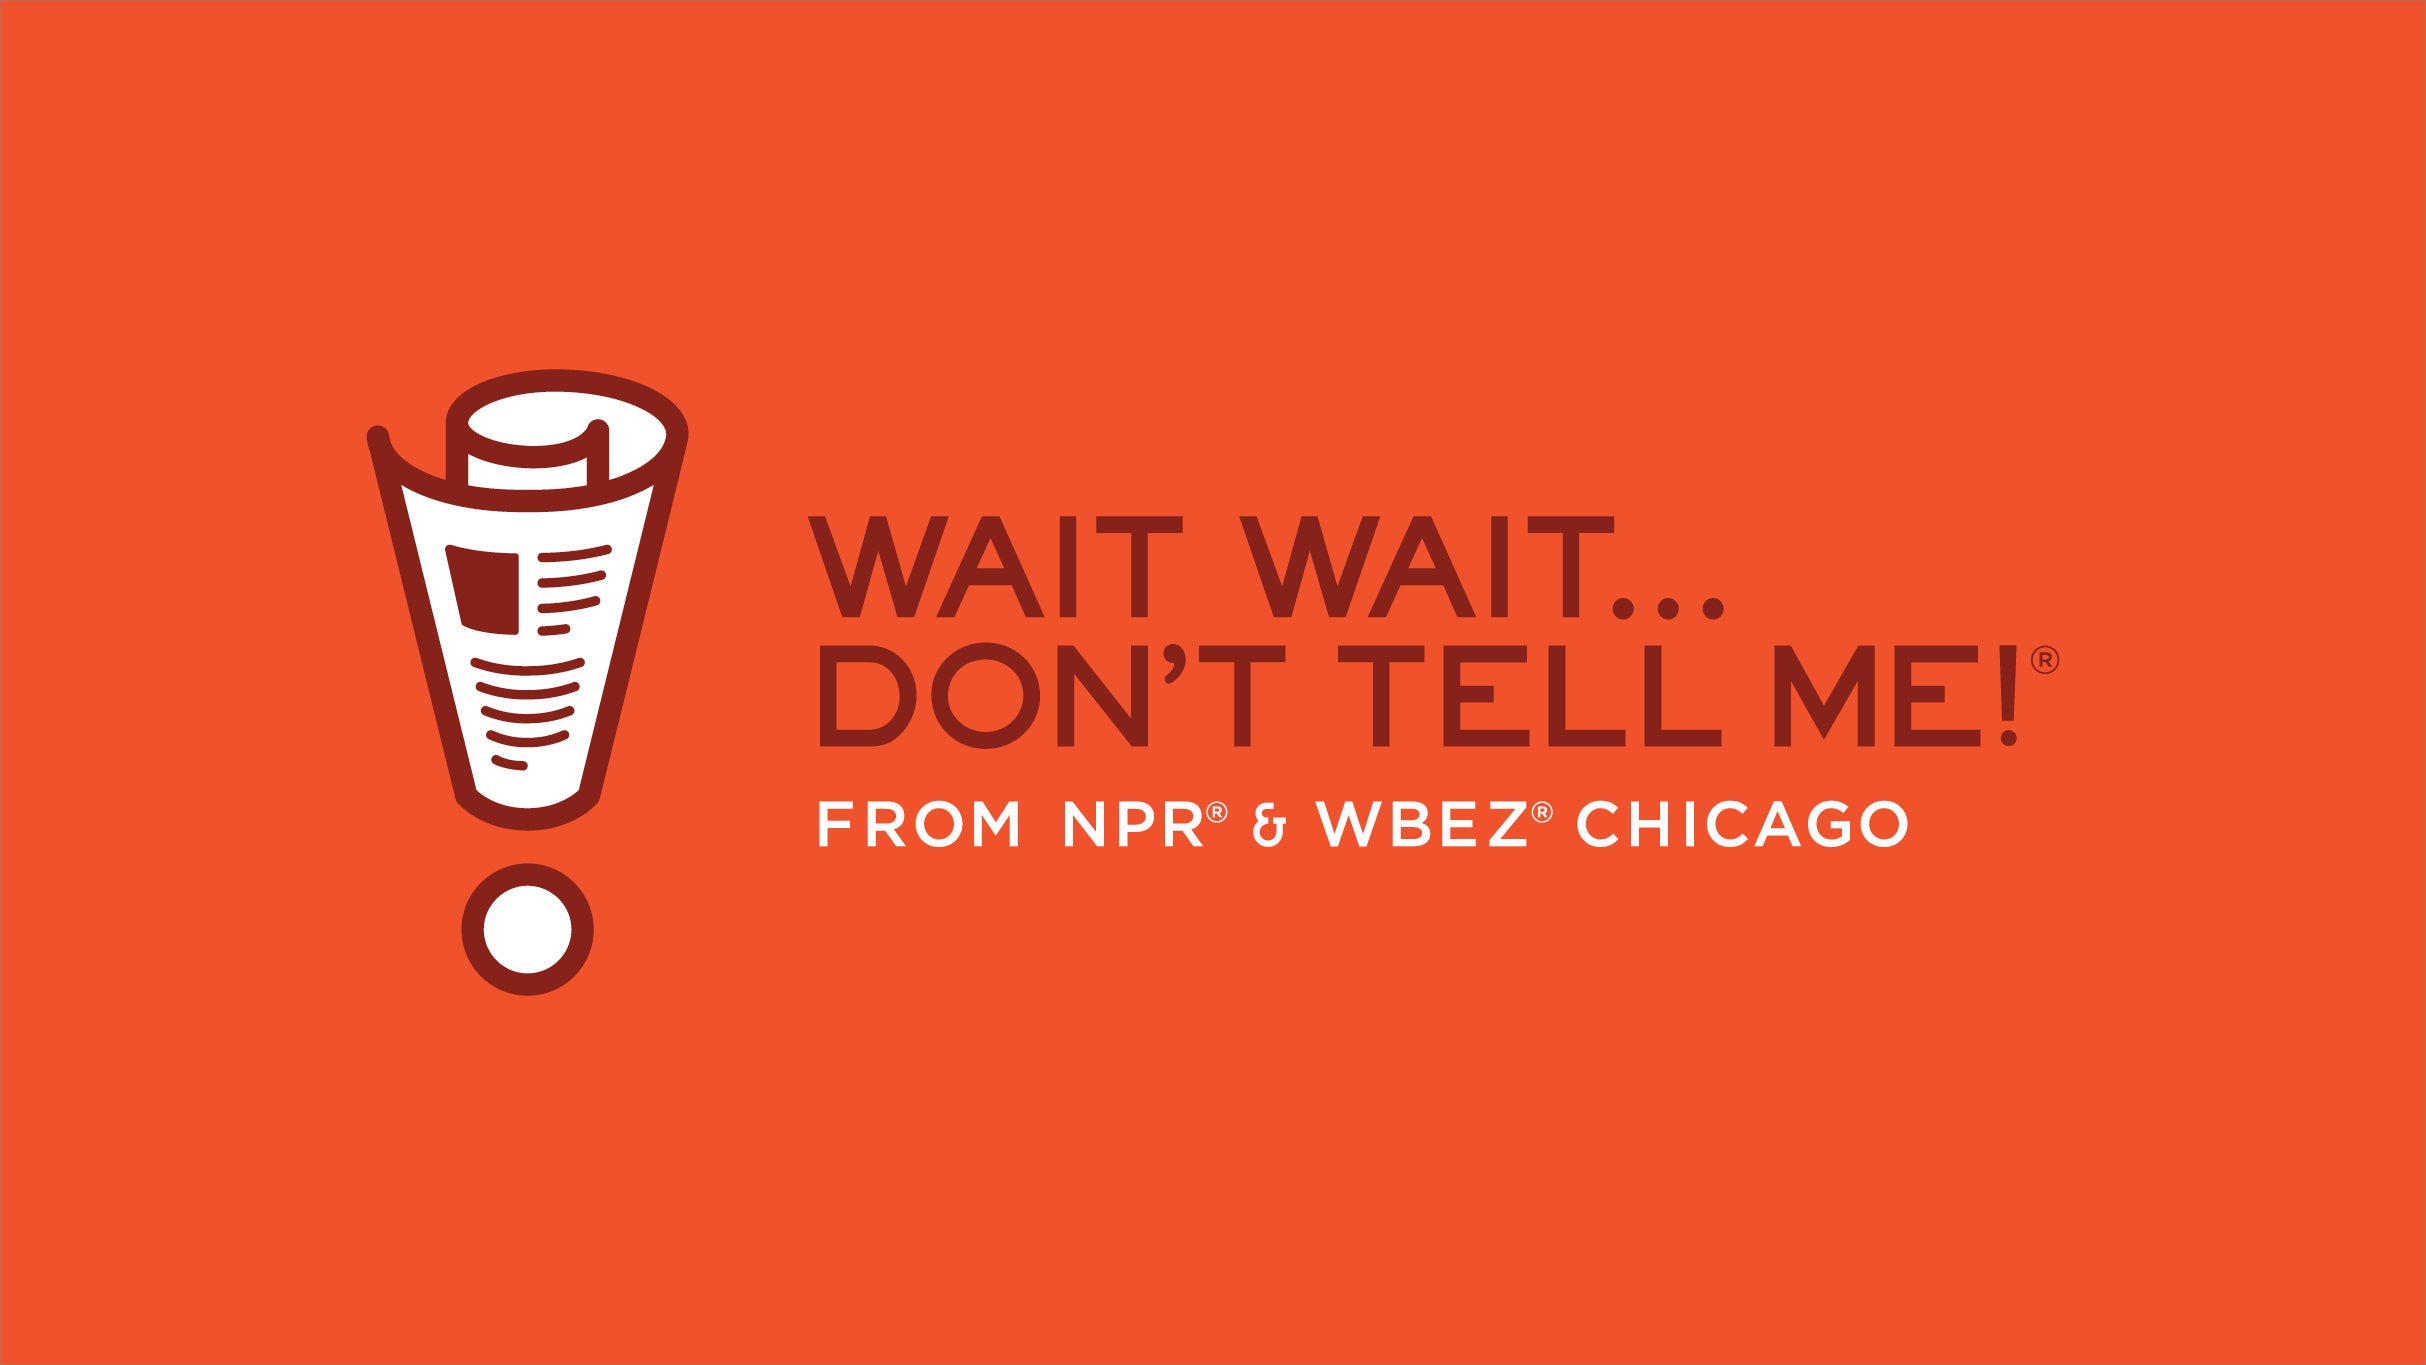 NPR Presents WAIT, WAIT...DON'T TELL ME! in association with WHYY in Philadelphia promo photo for TD Bank presale offer code